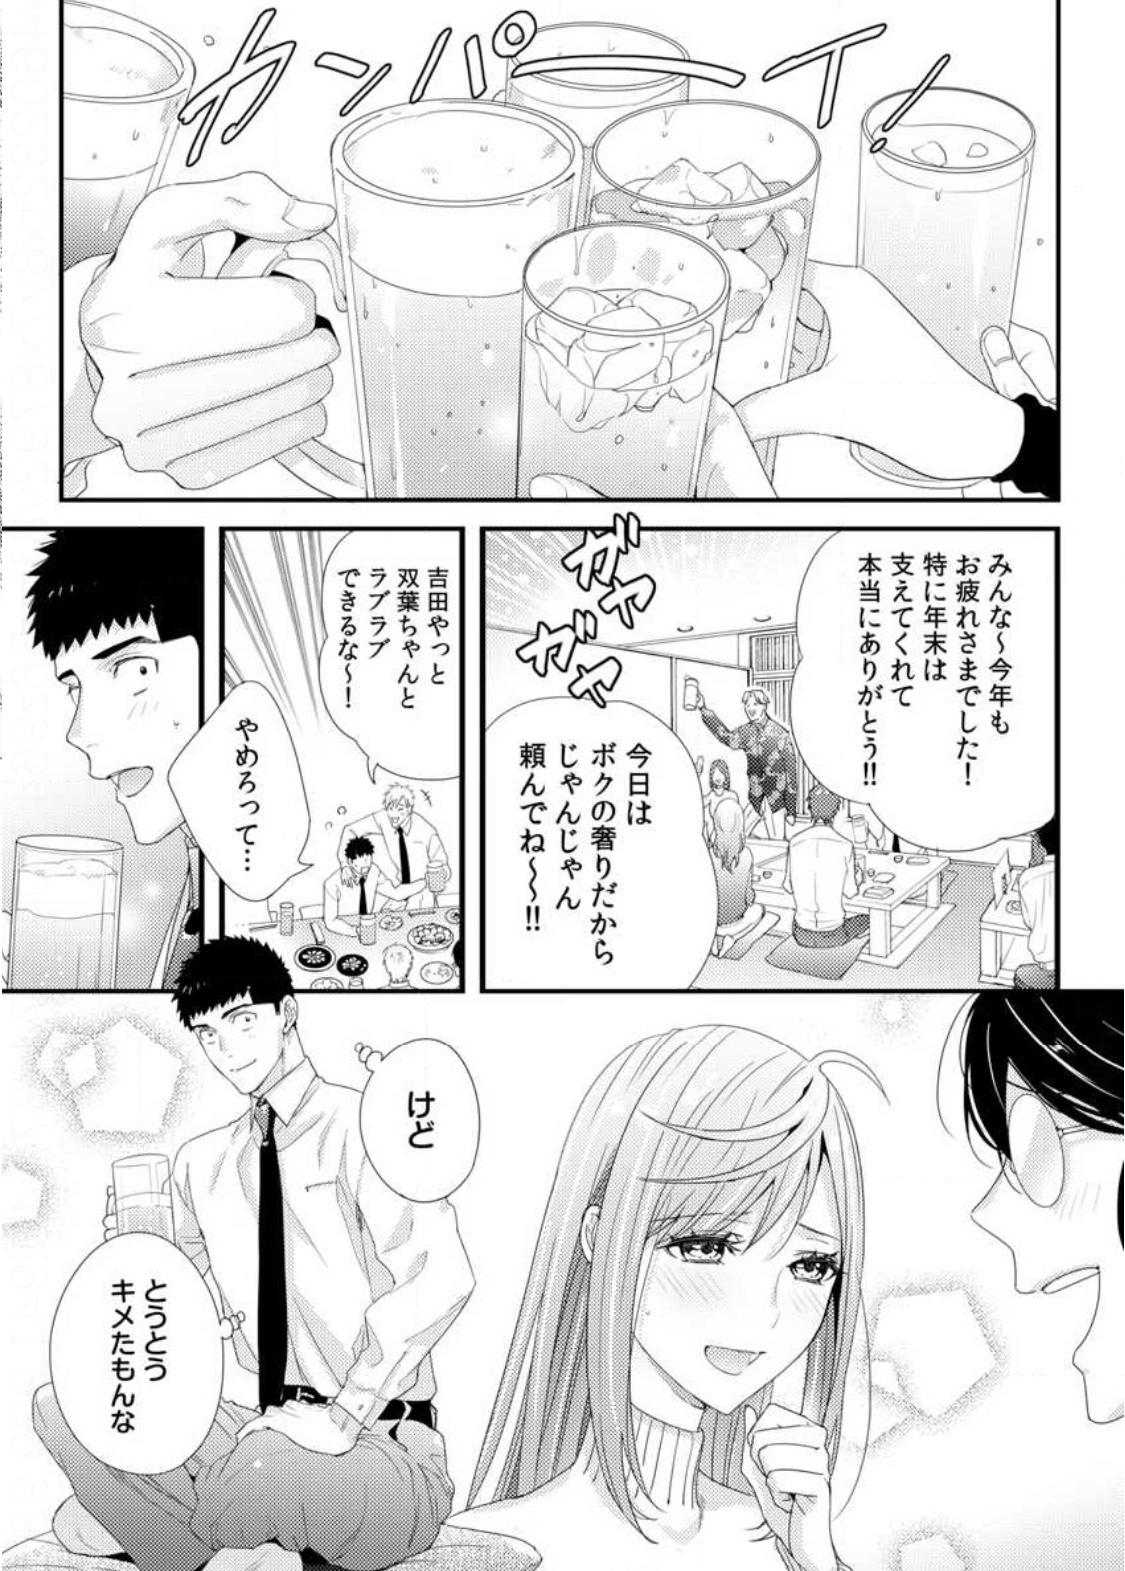 Please Let Me Hold You Futaba-San! Ch. 1-4 79